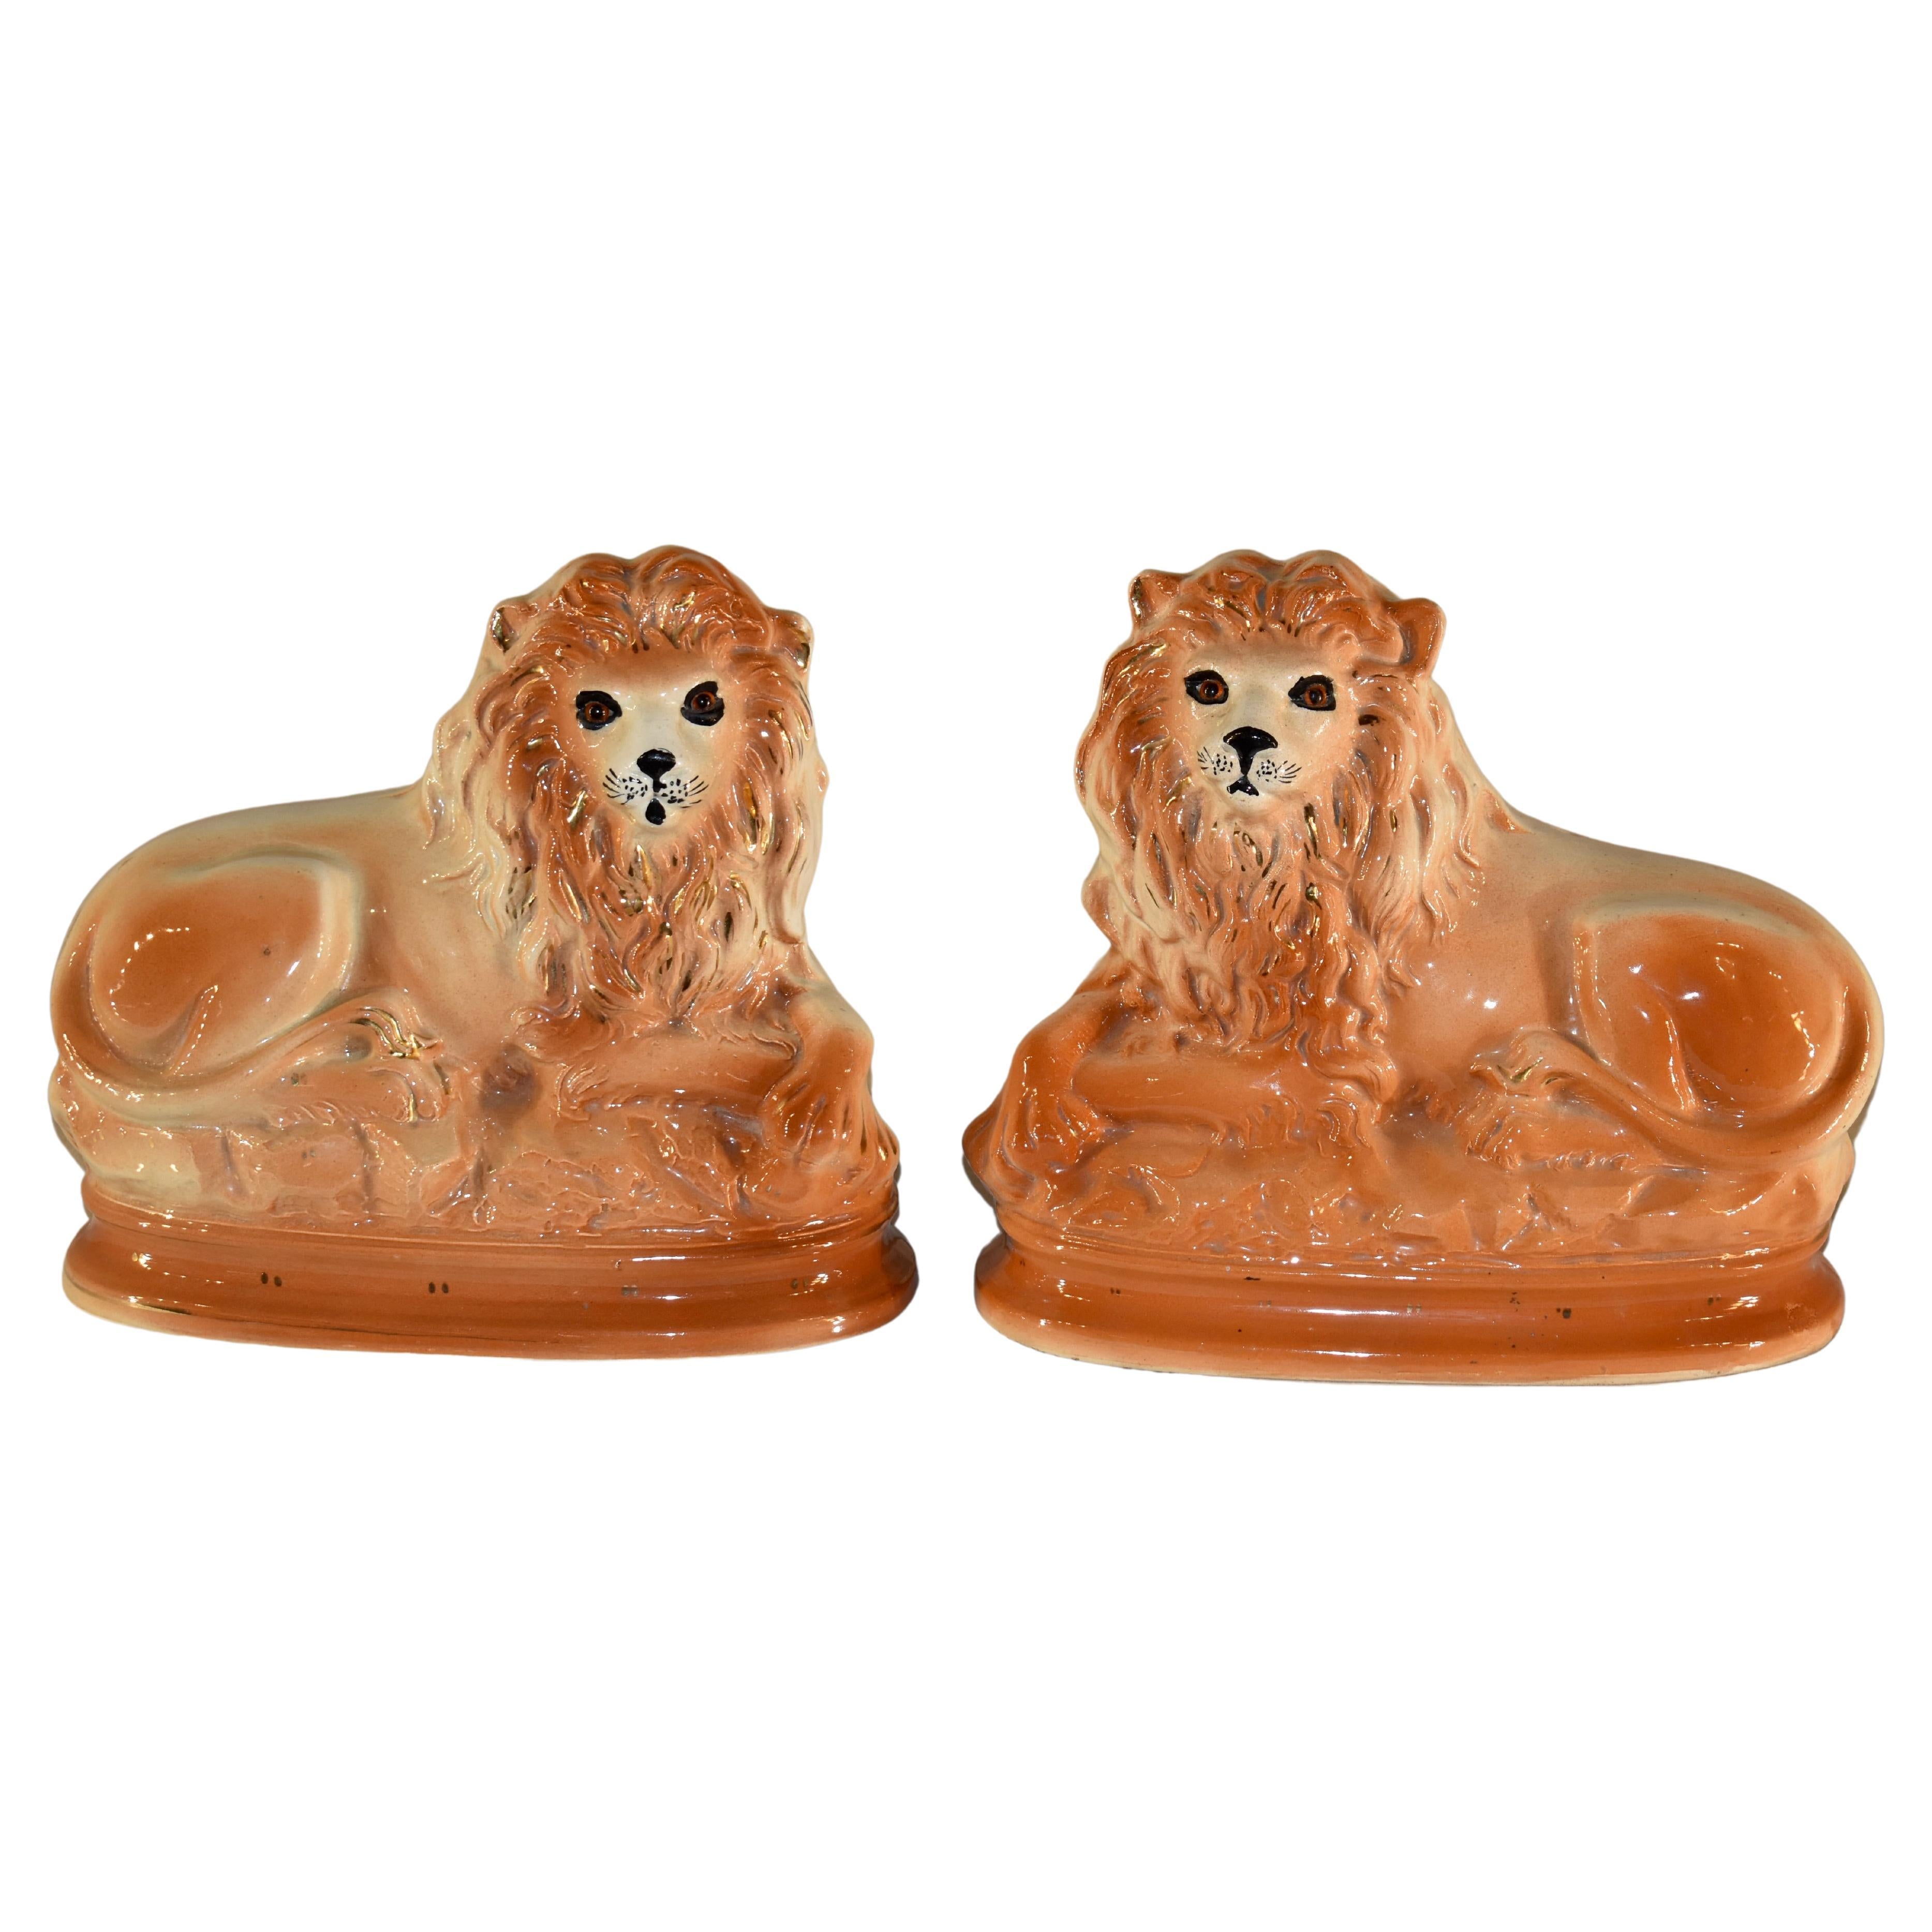 Pair of 19th Century Staffordshire Lions 